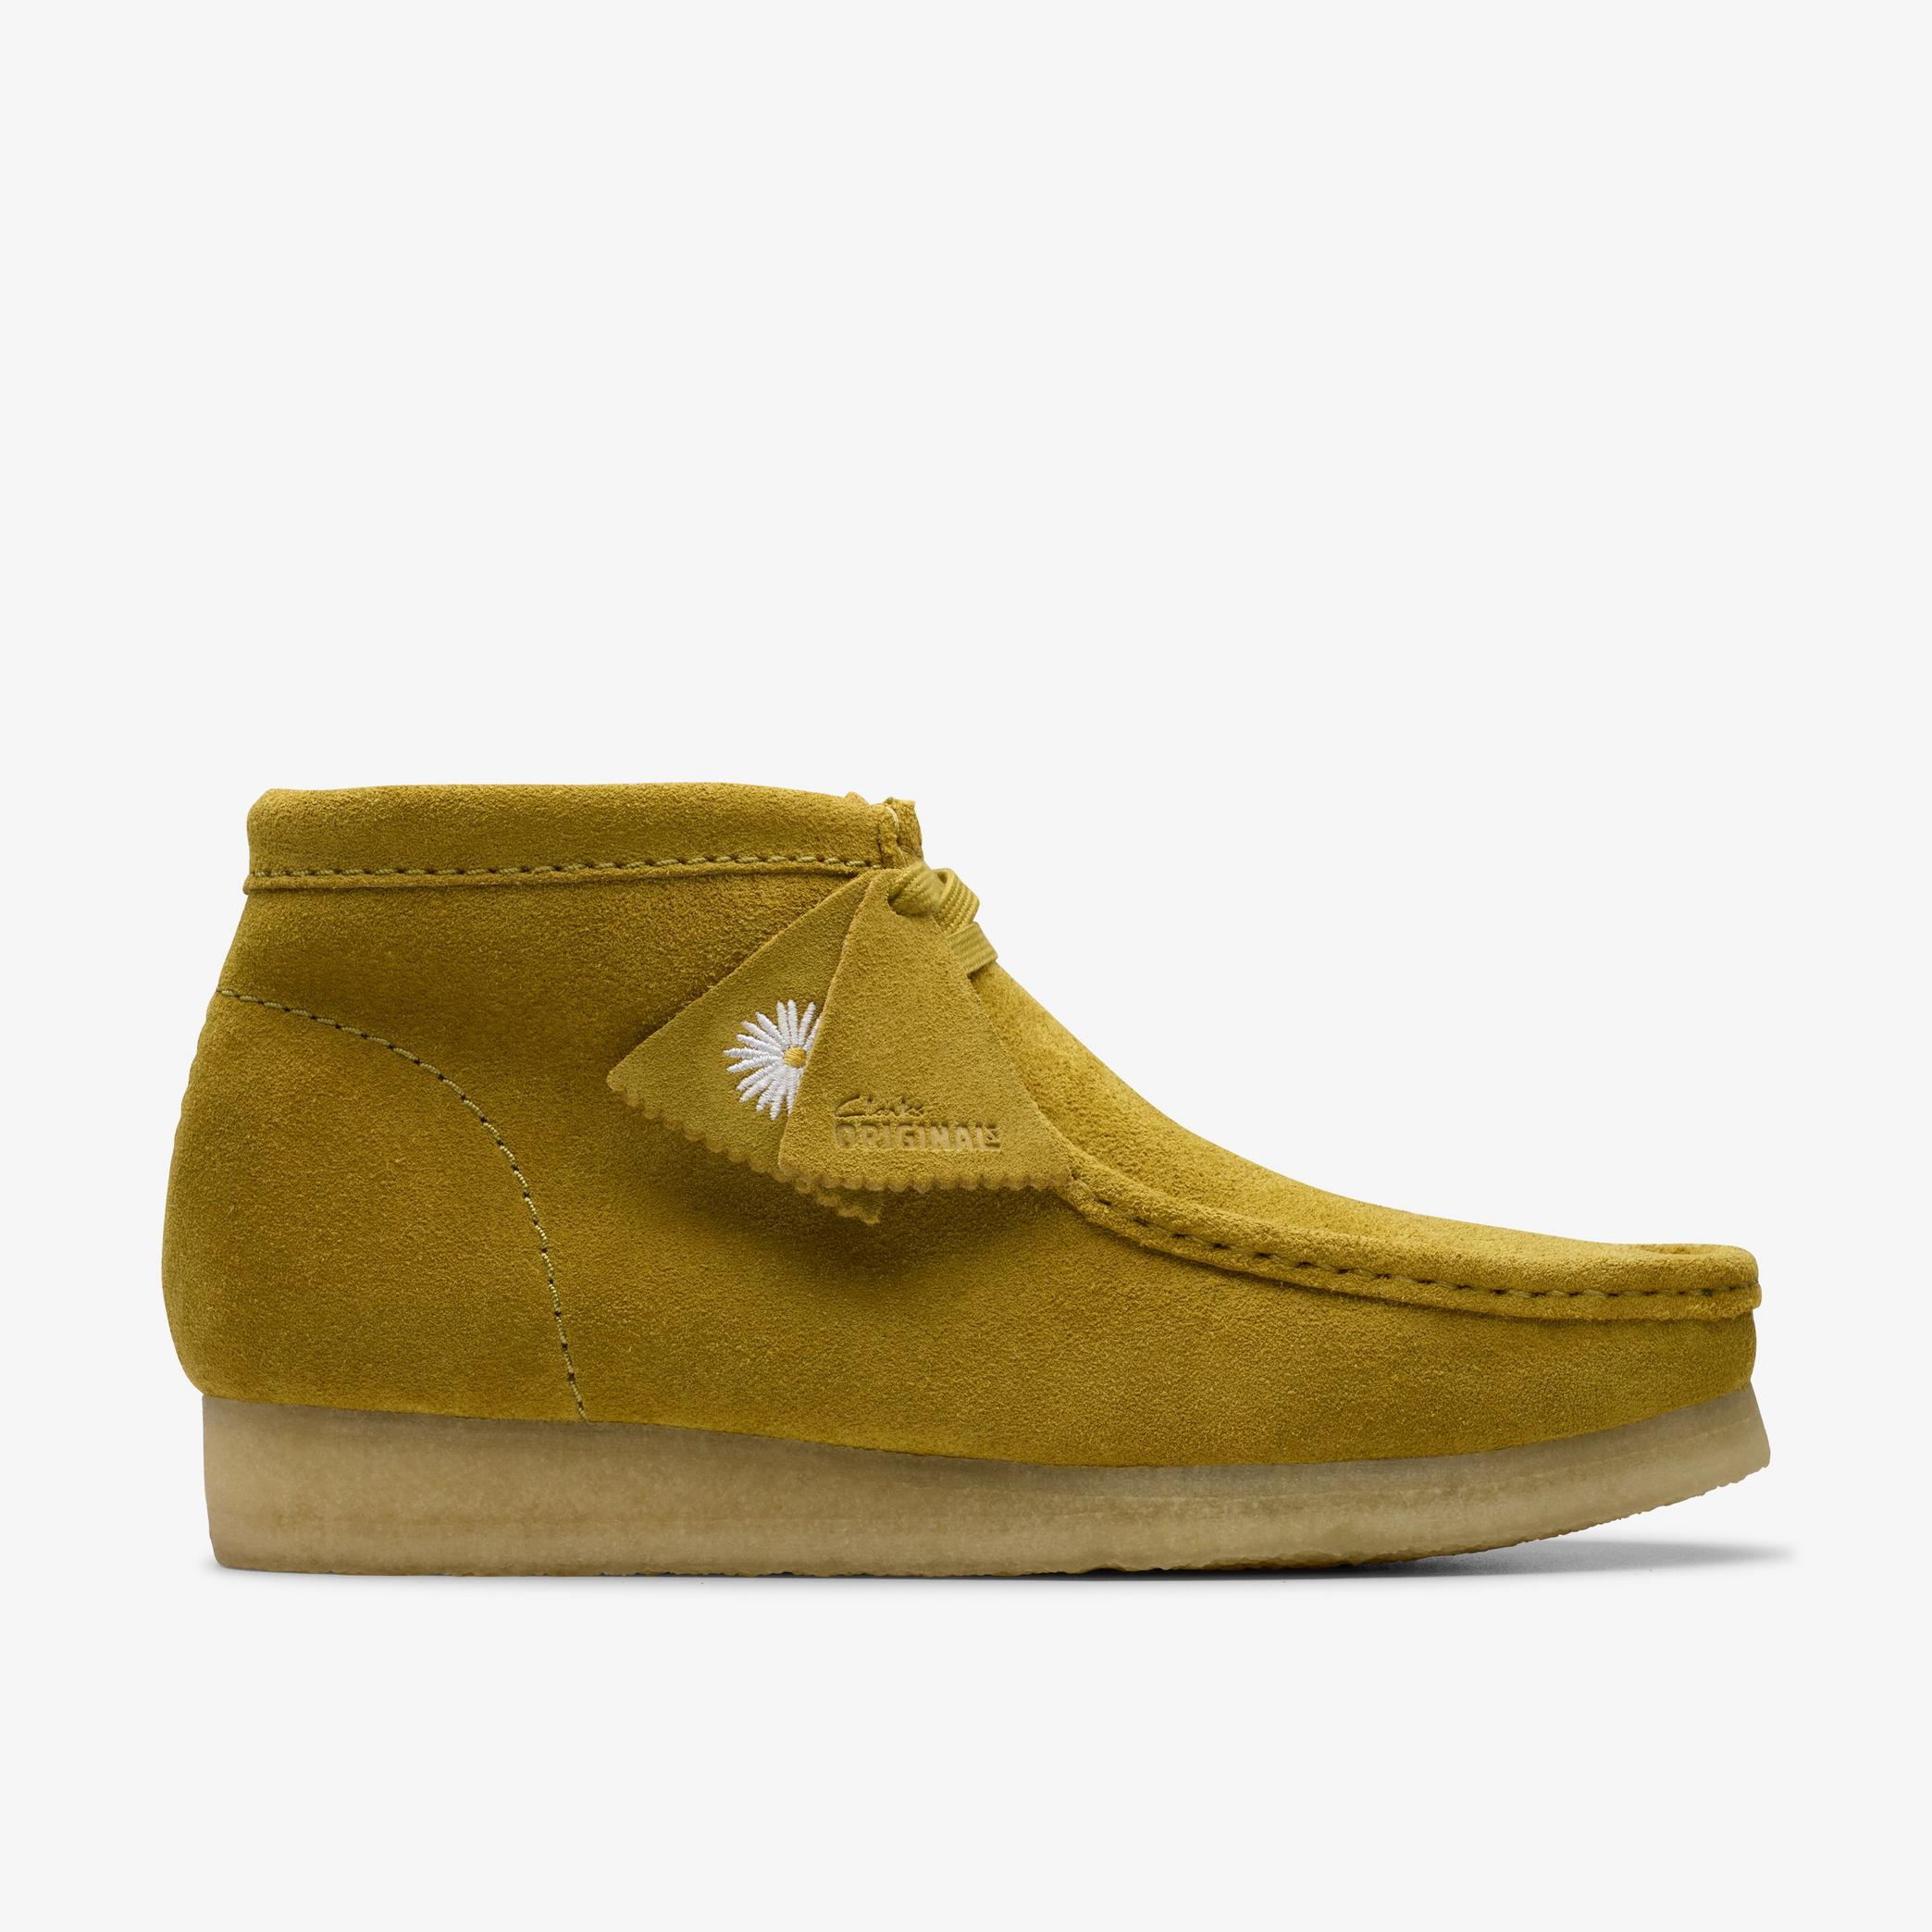 Wallabee Boot Olive Suede Wallabee, view 1 of 7